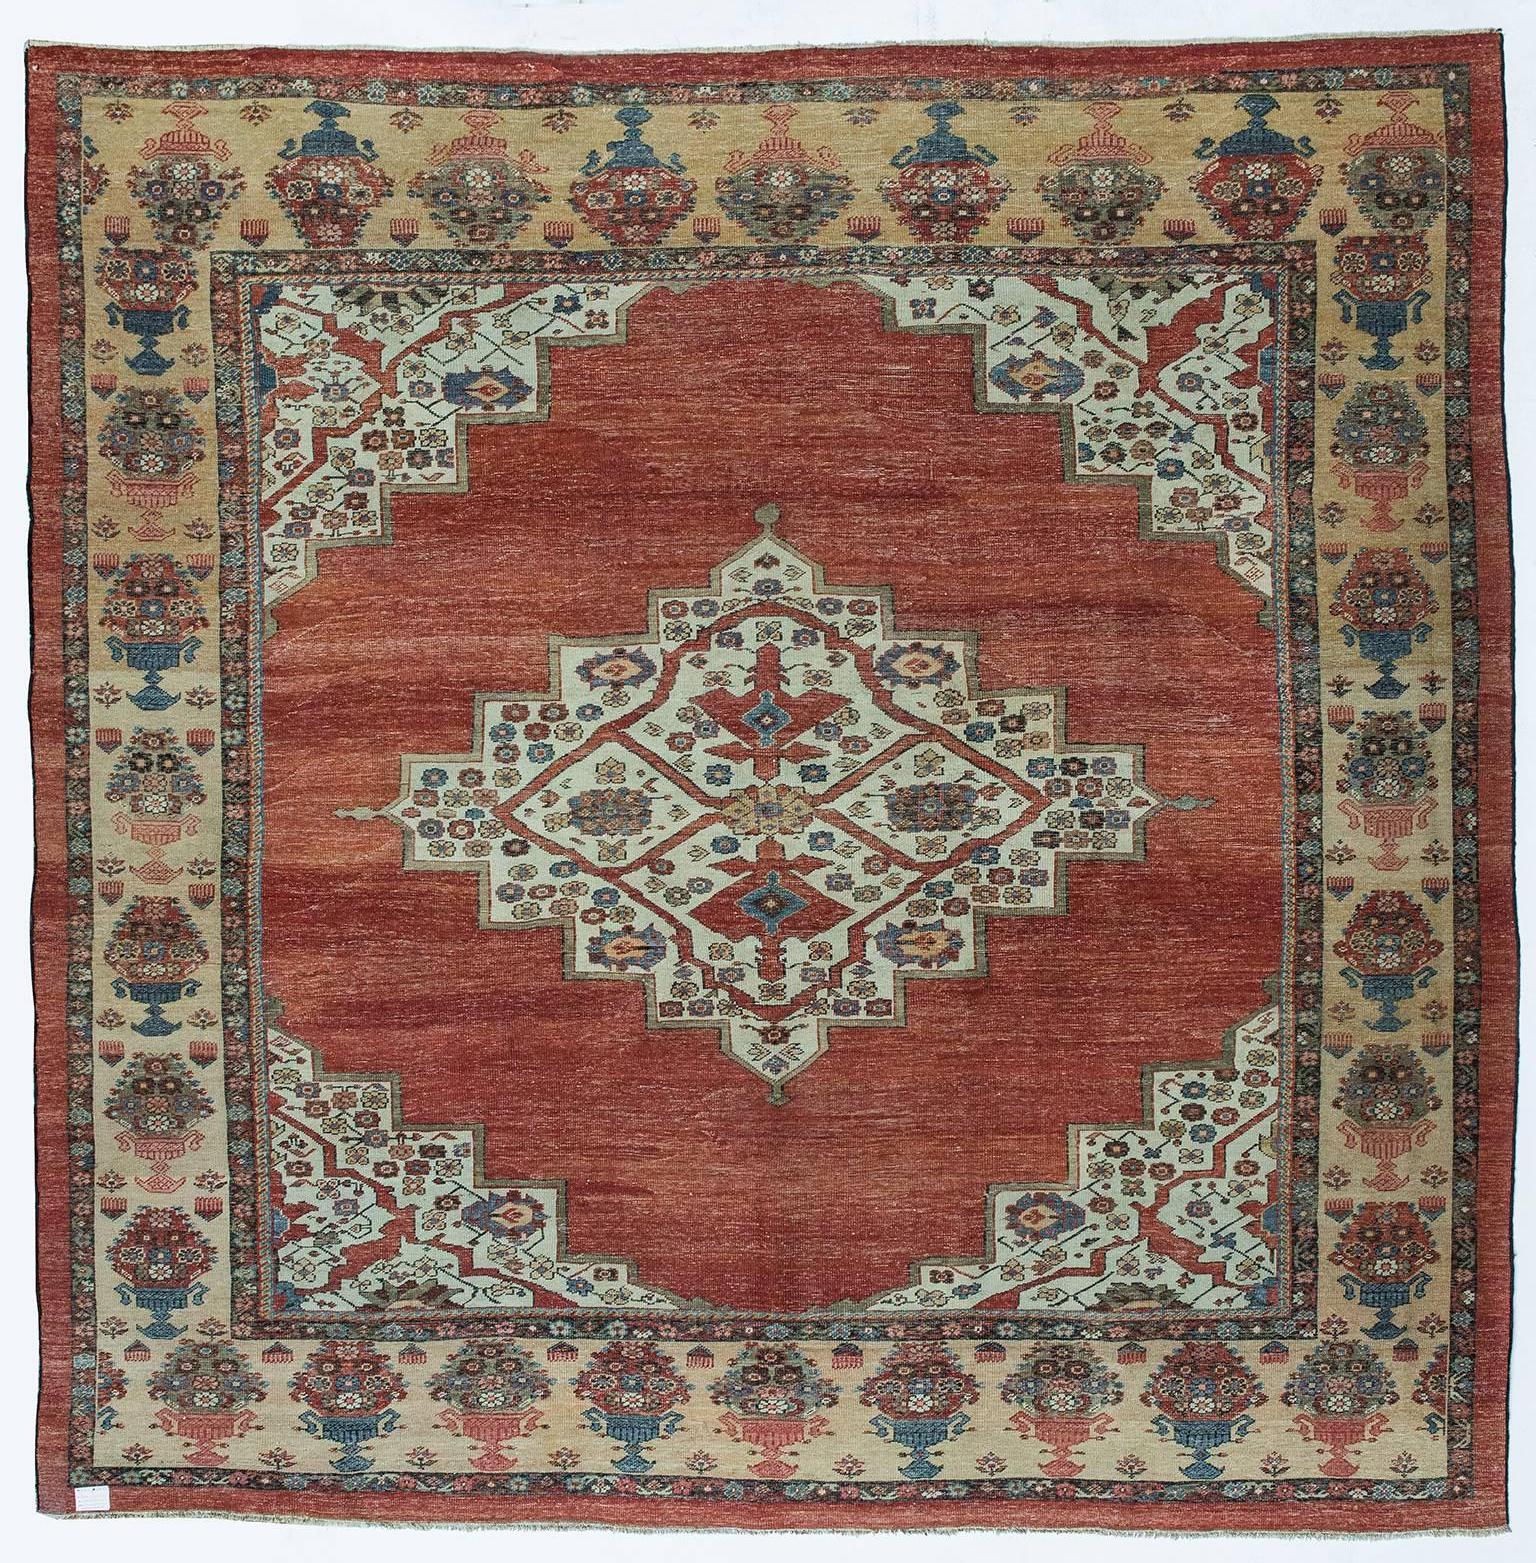 Rare perfect antique Azeri rug, square sizes, pastel elegant colors, from my private collection.
This carpet is one of the most beautiful and elegant oriental antique carpets that I have seen: it's in a class by itself, with its own personality and